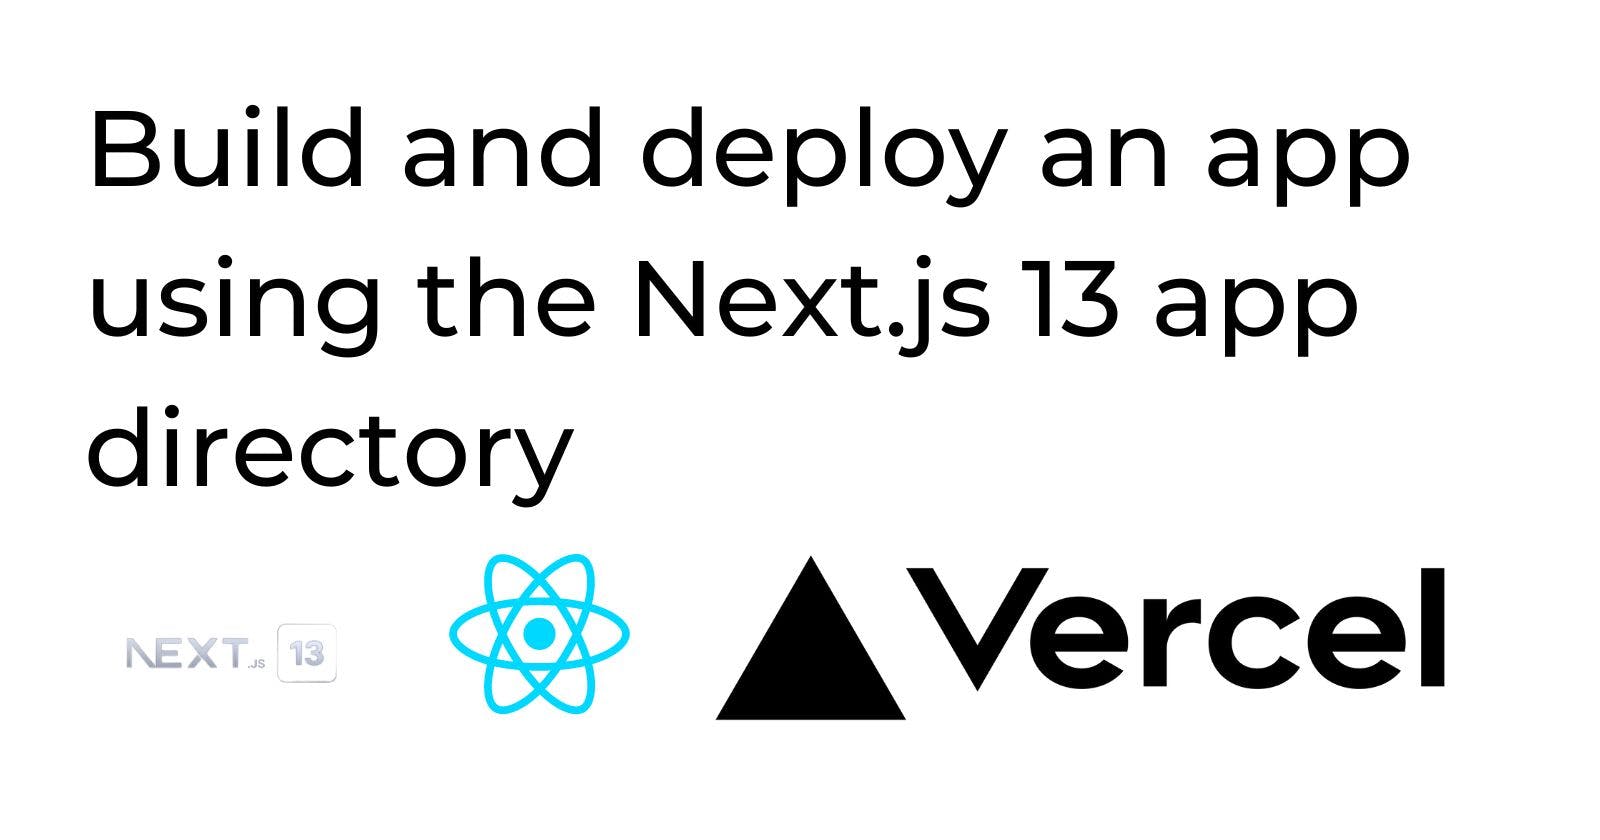 Build and deploy an app using the Next.js 13 app directory.